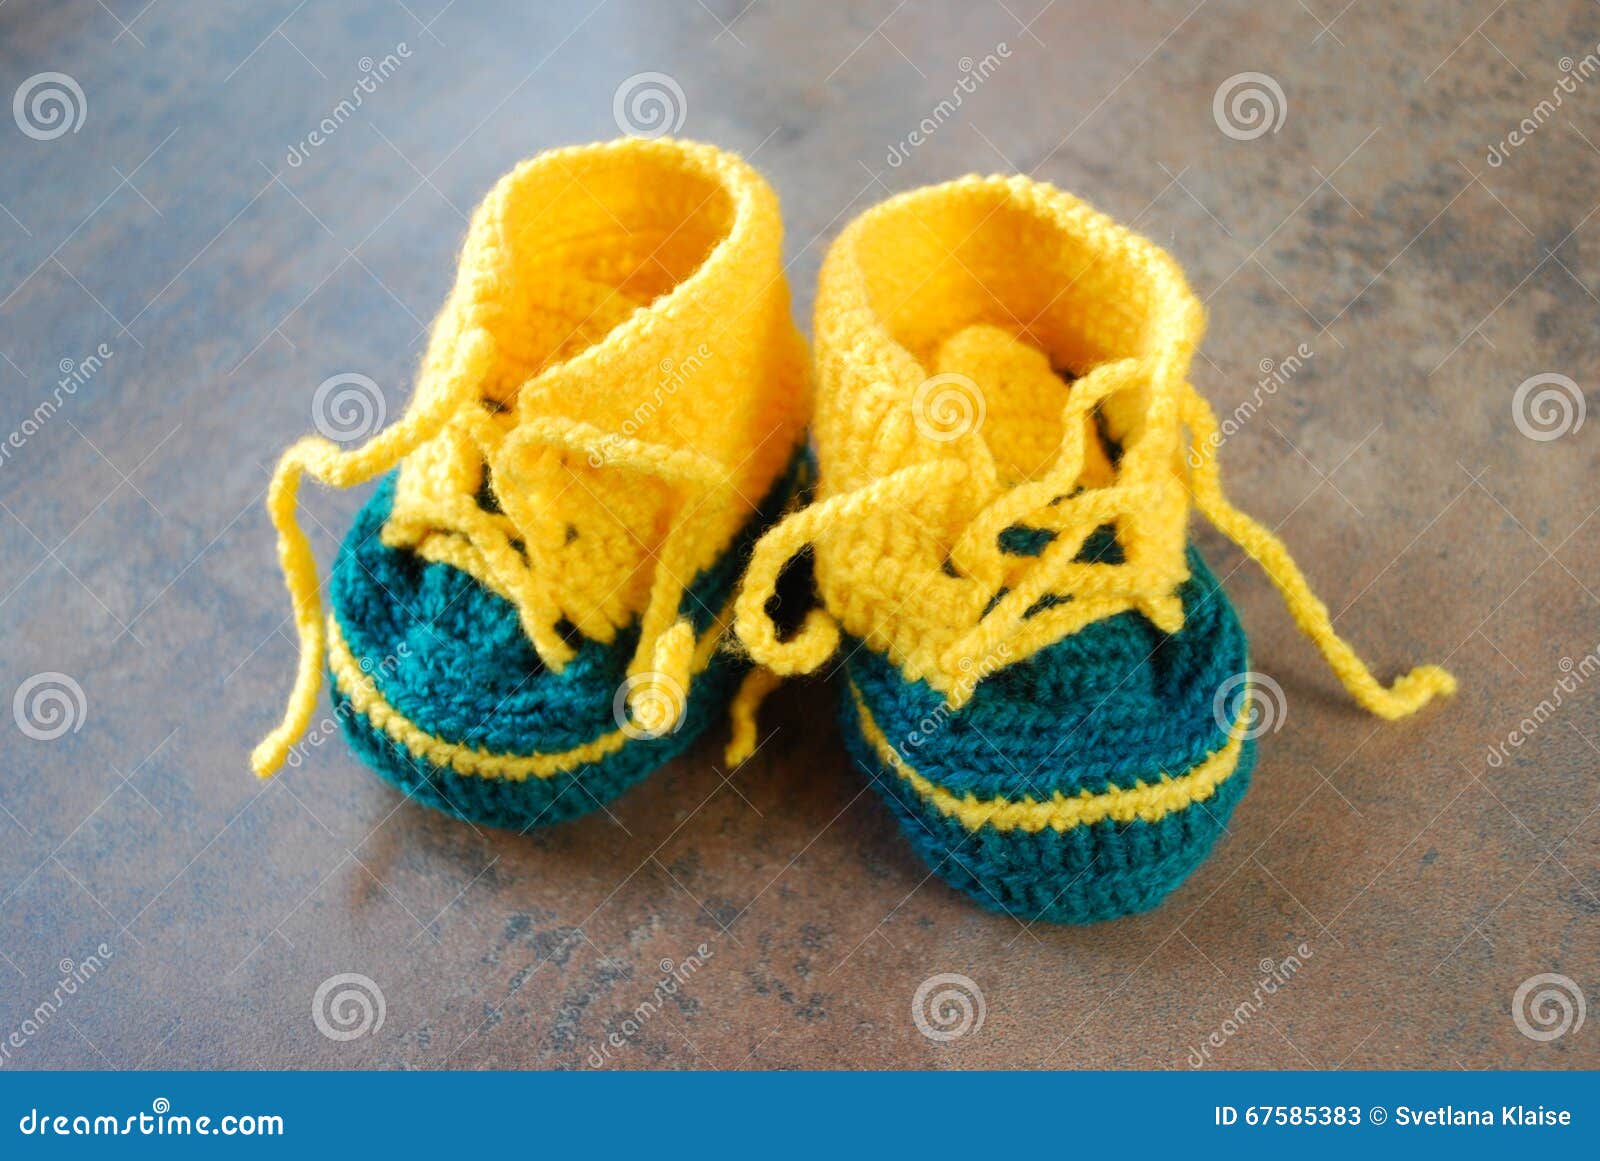 Crochet Babies Training Shoes. First Shoes for Kids Stock Image - Image of  fashion, little: 67585383